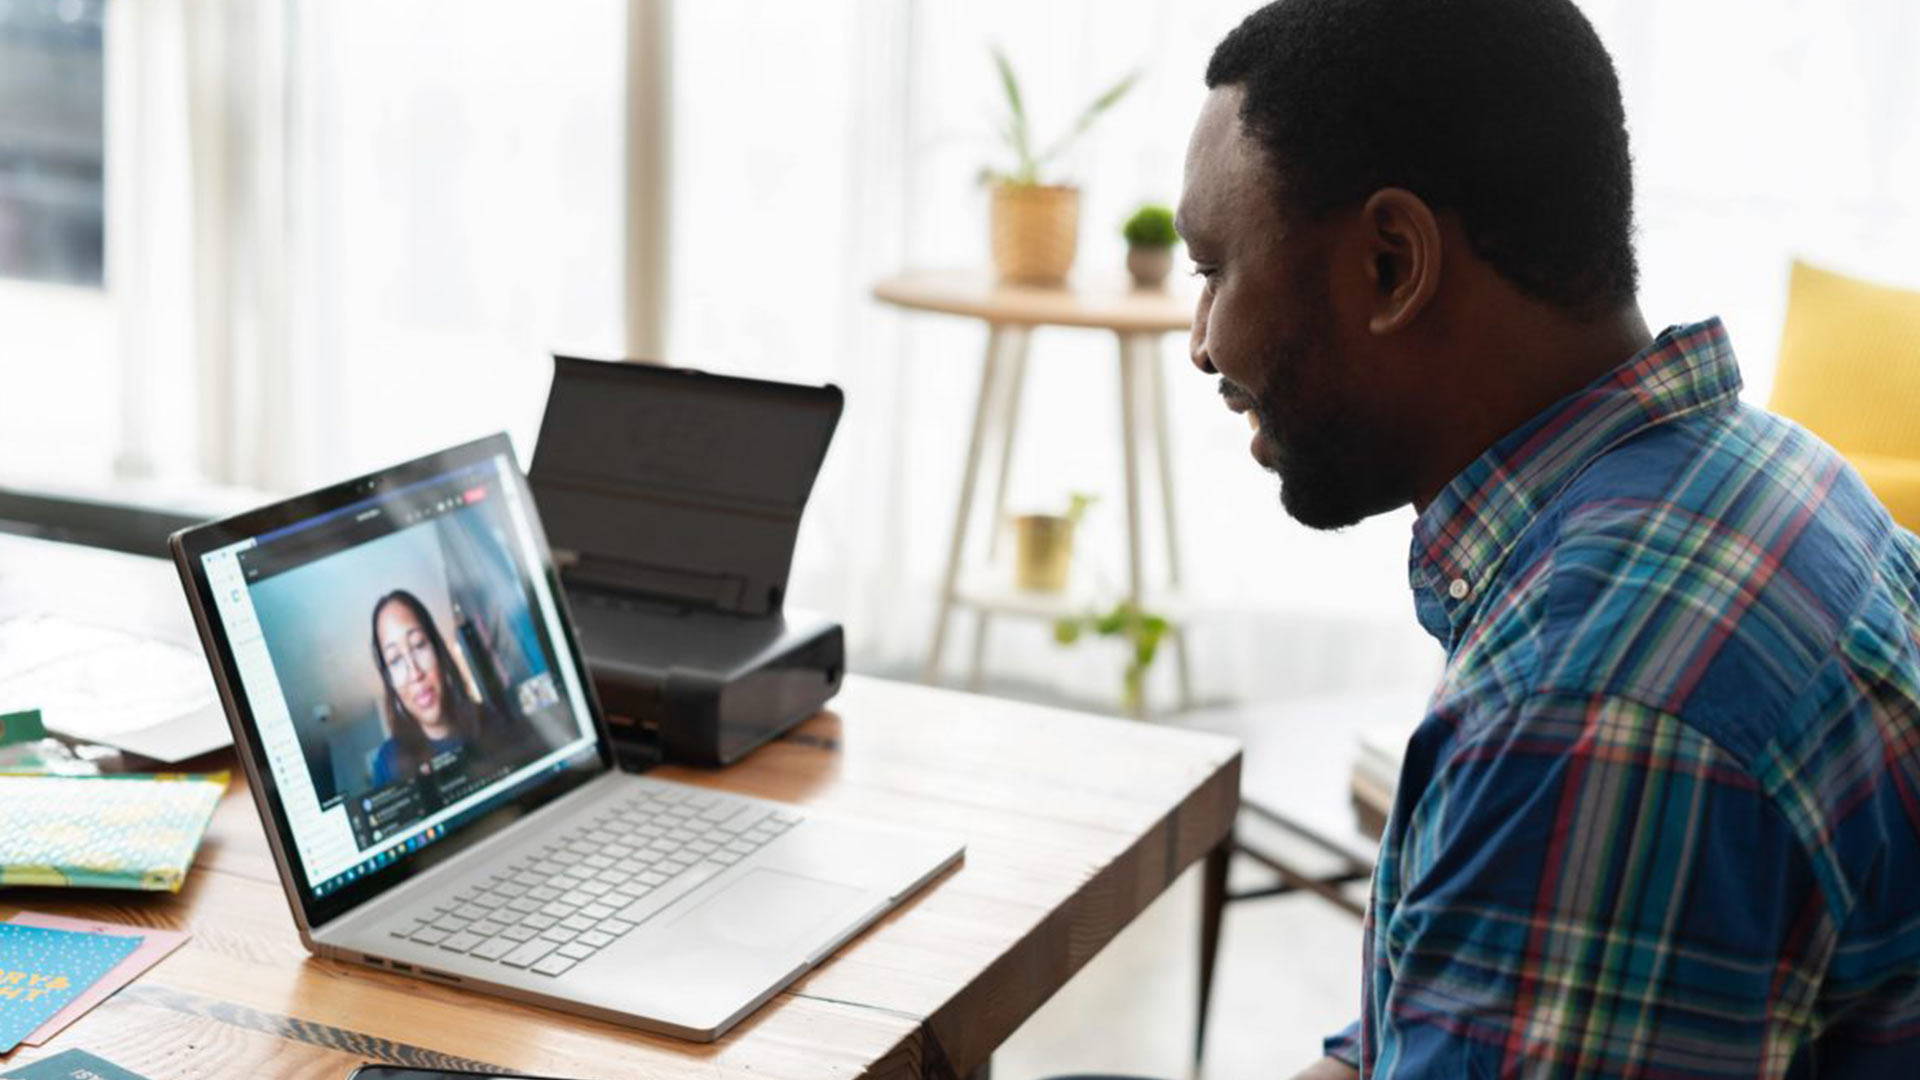 Man-on-a-video-call-on-a-laptop